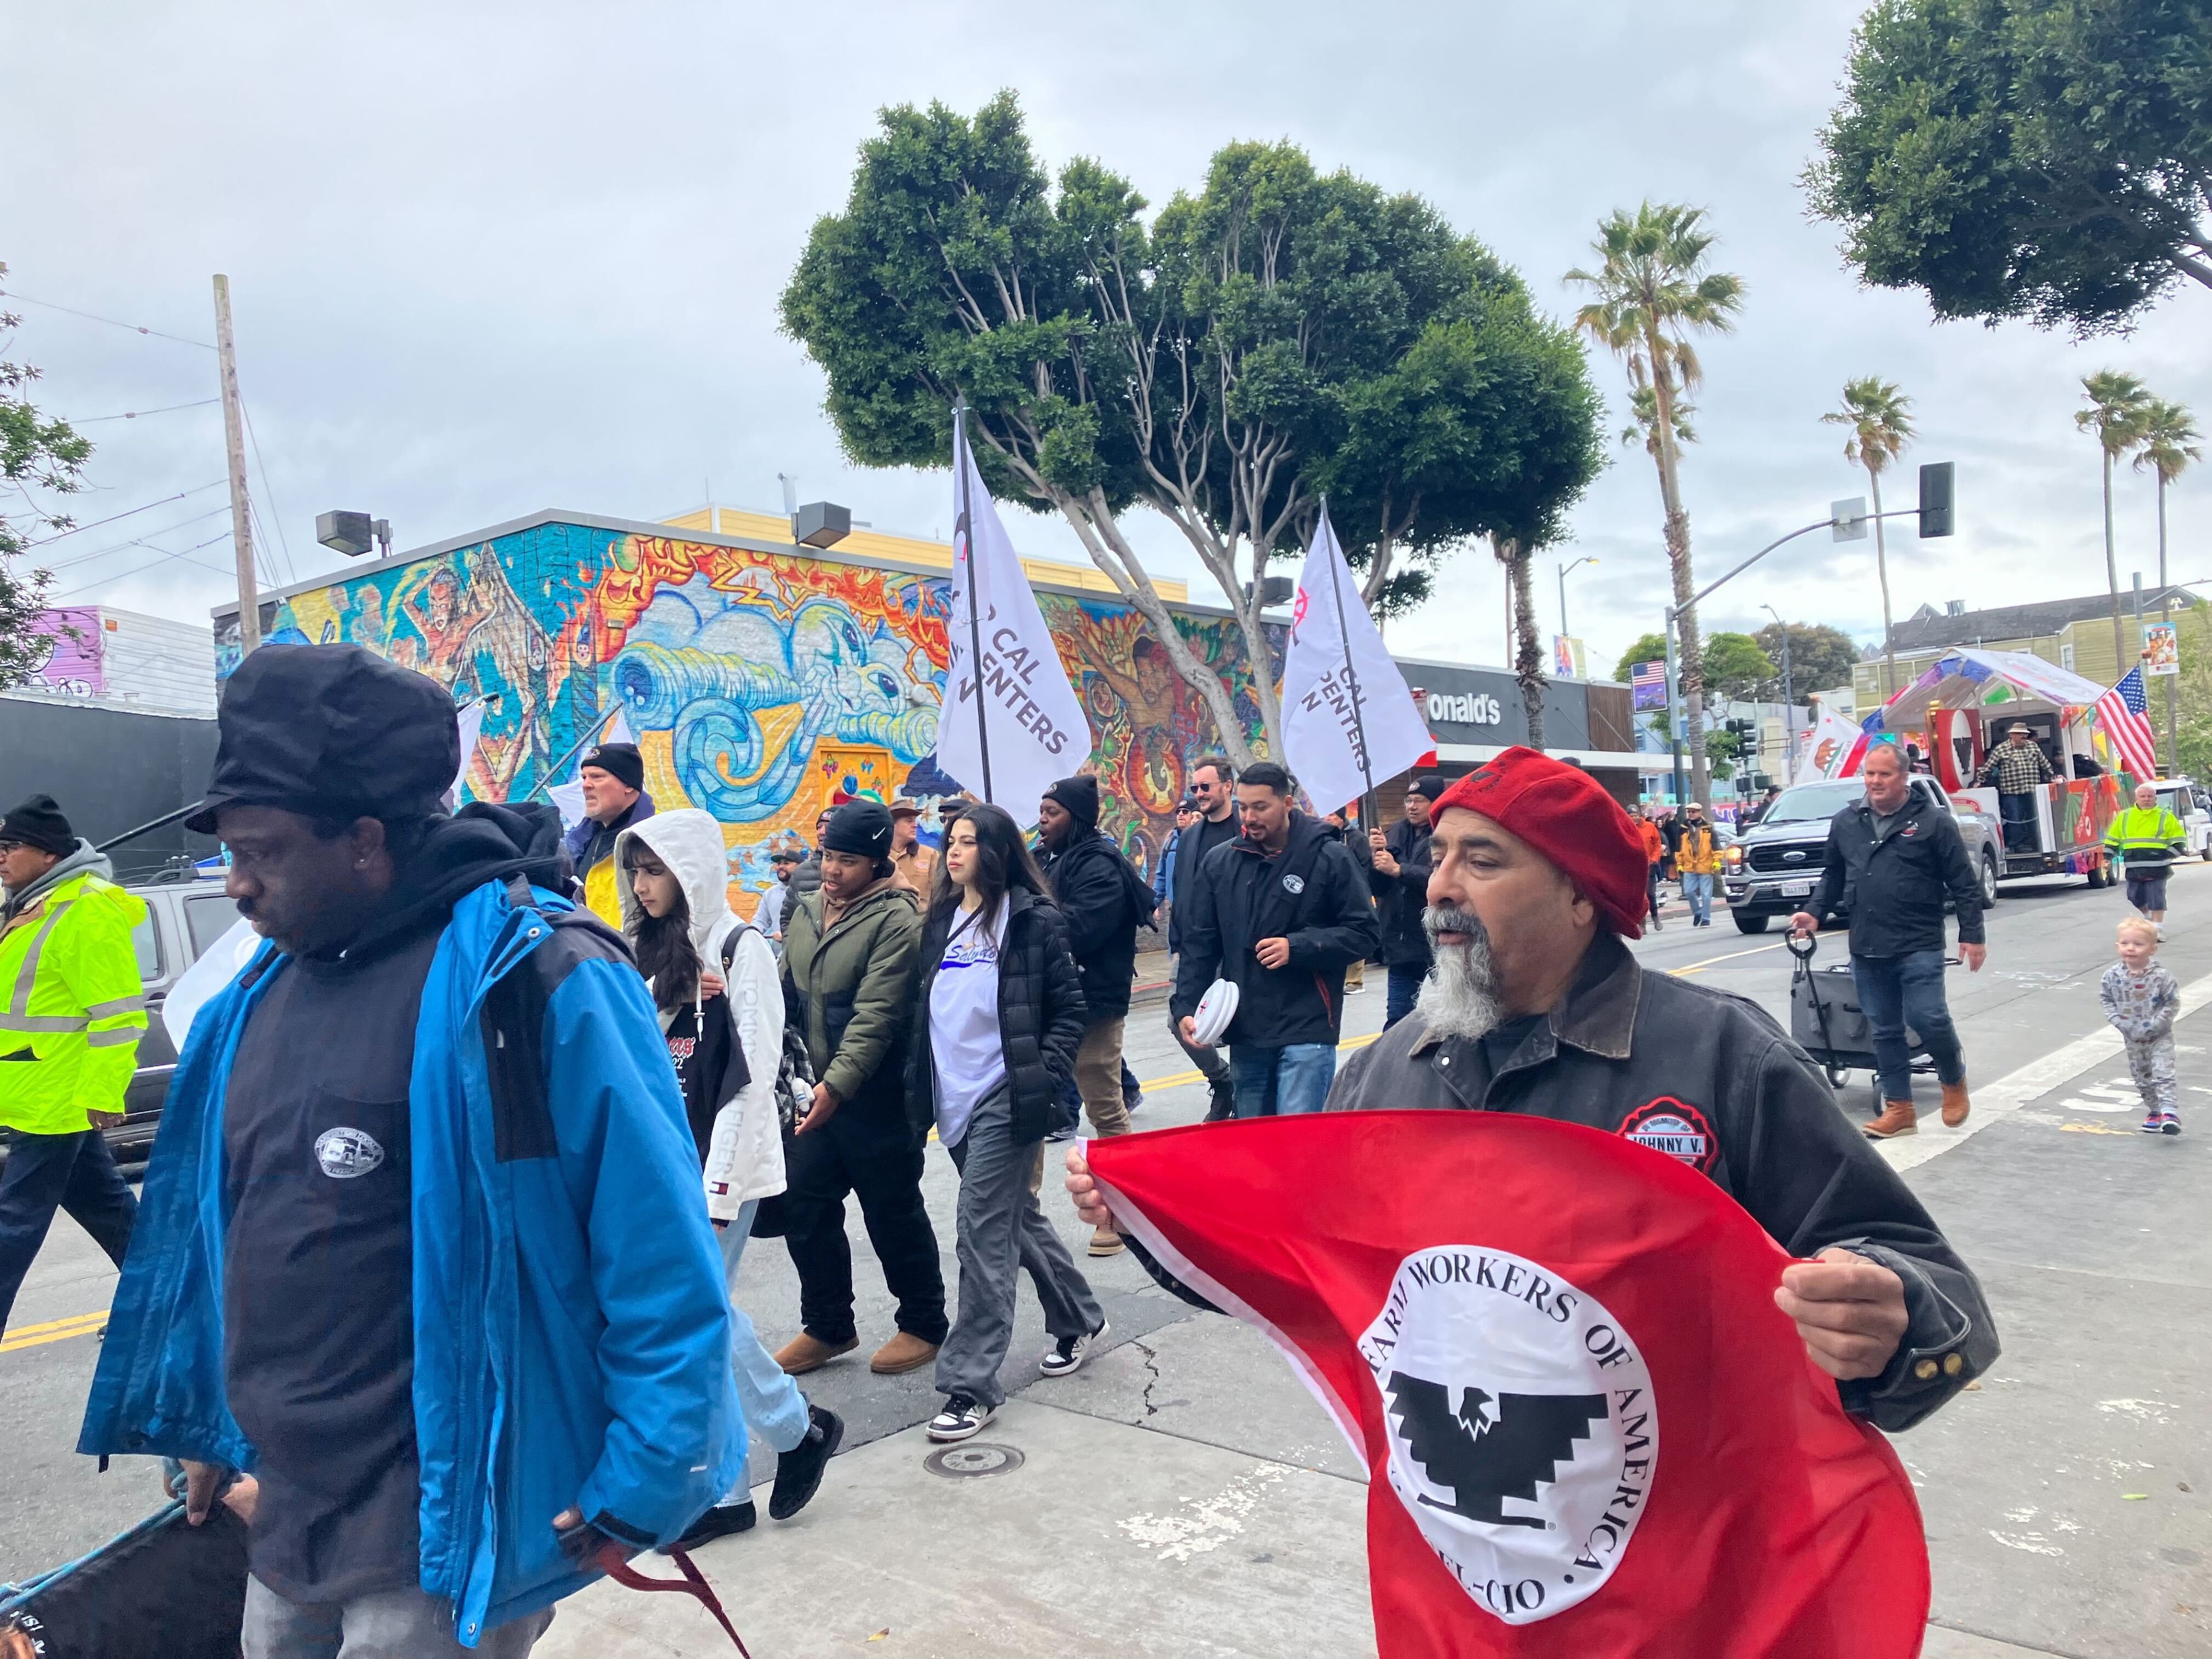 A group of people marching, some carrying banners, with a colorful mural and palm trees in the background.